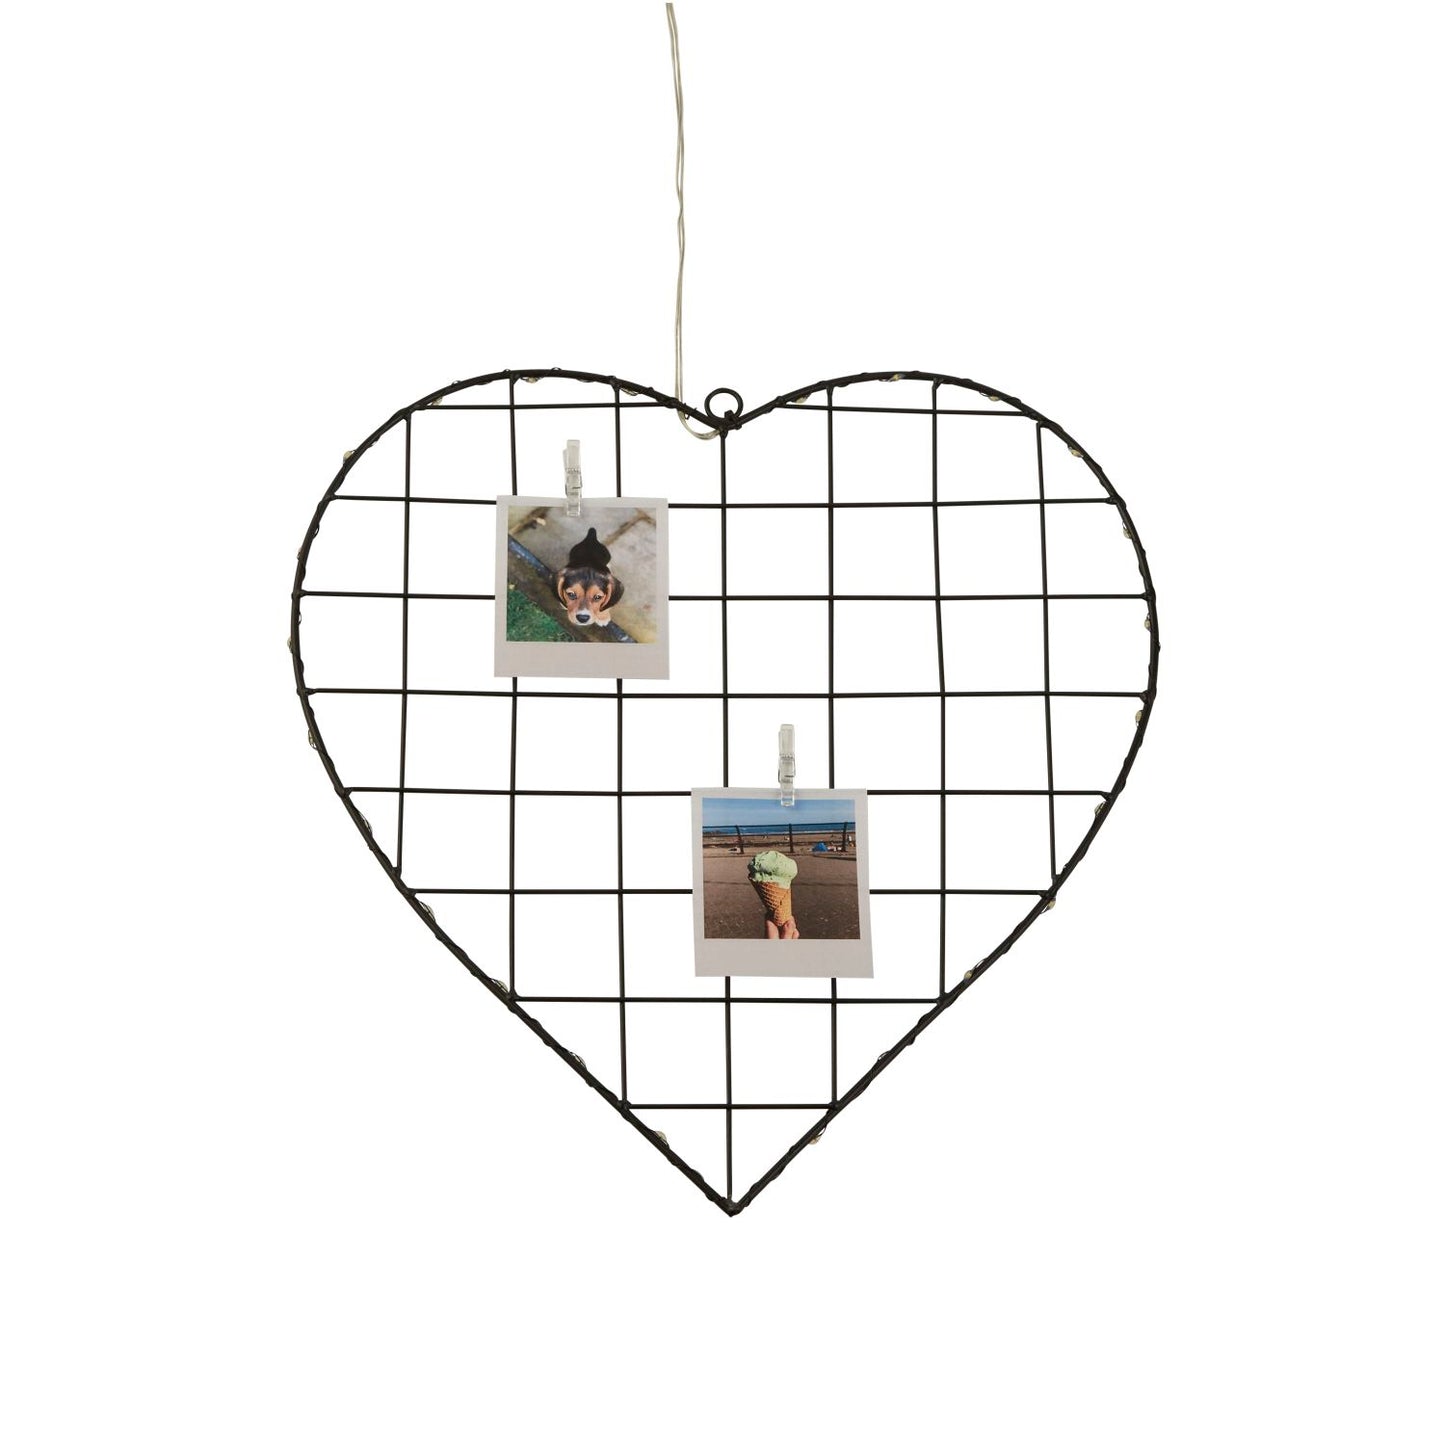 Hanging Battery Powered Light Up Wire Heart